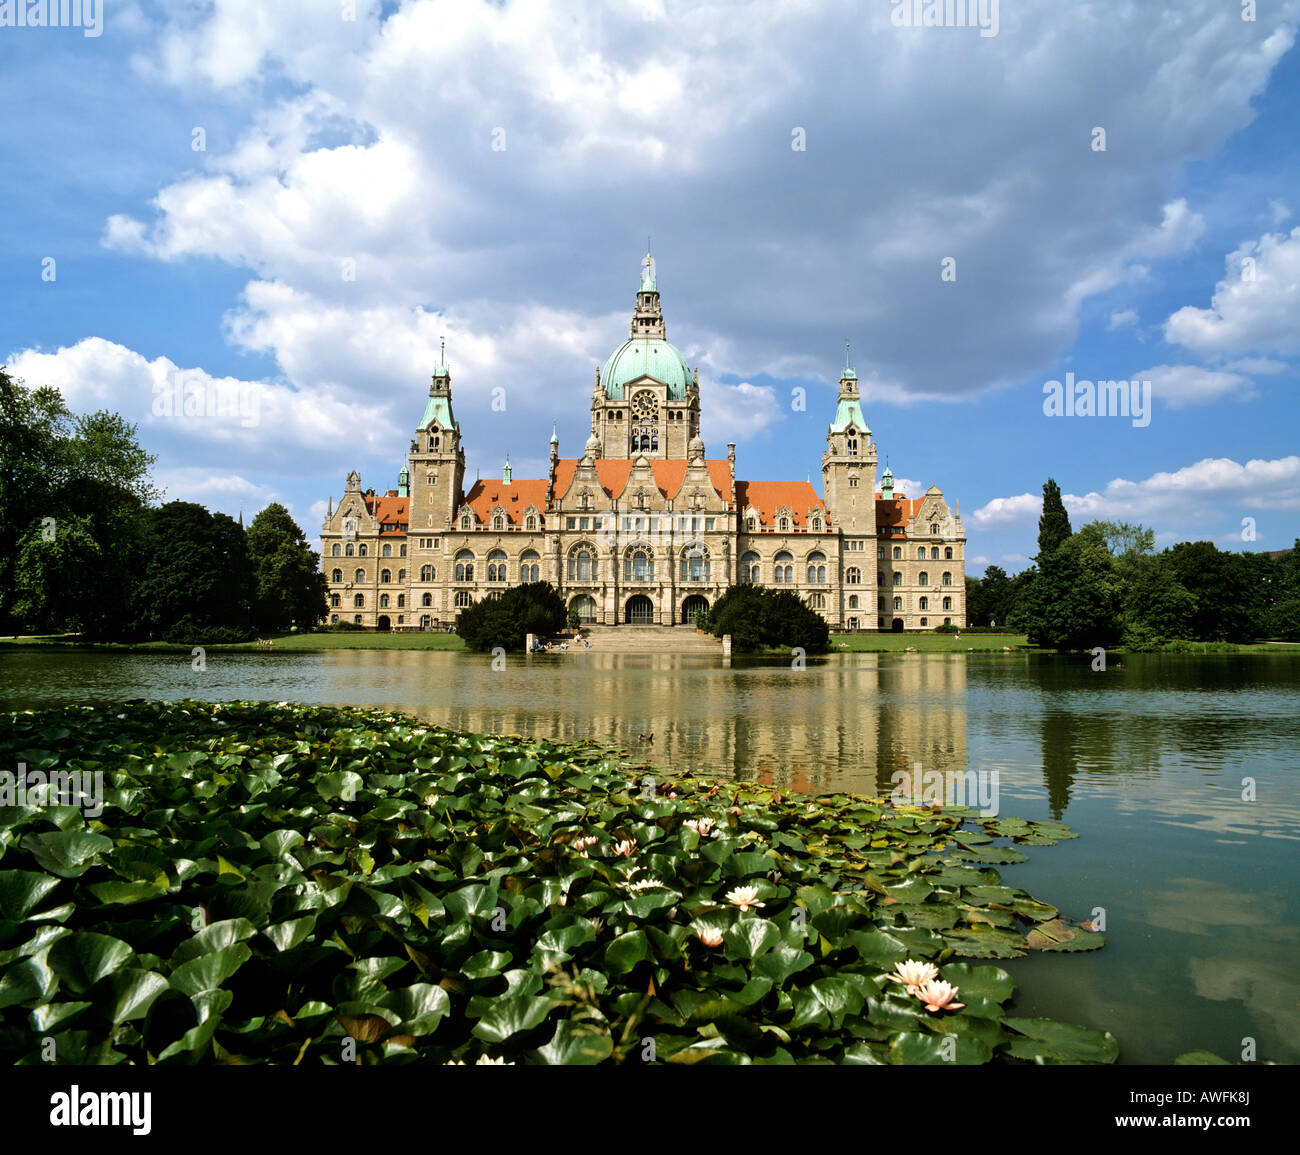 New City Hall and Maschteich Pond, Hanover, Lower Saxony, Germany, Europe Stock Photo